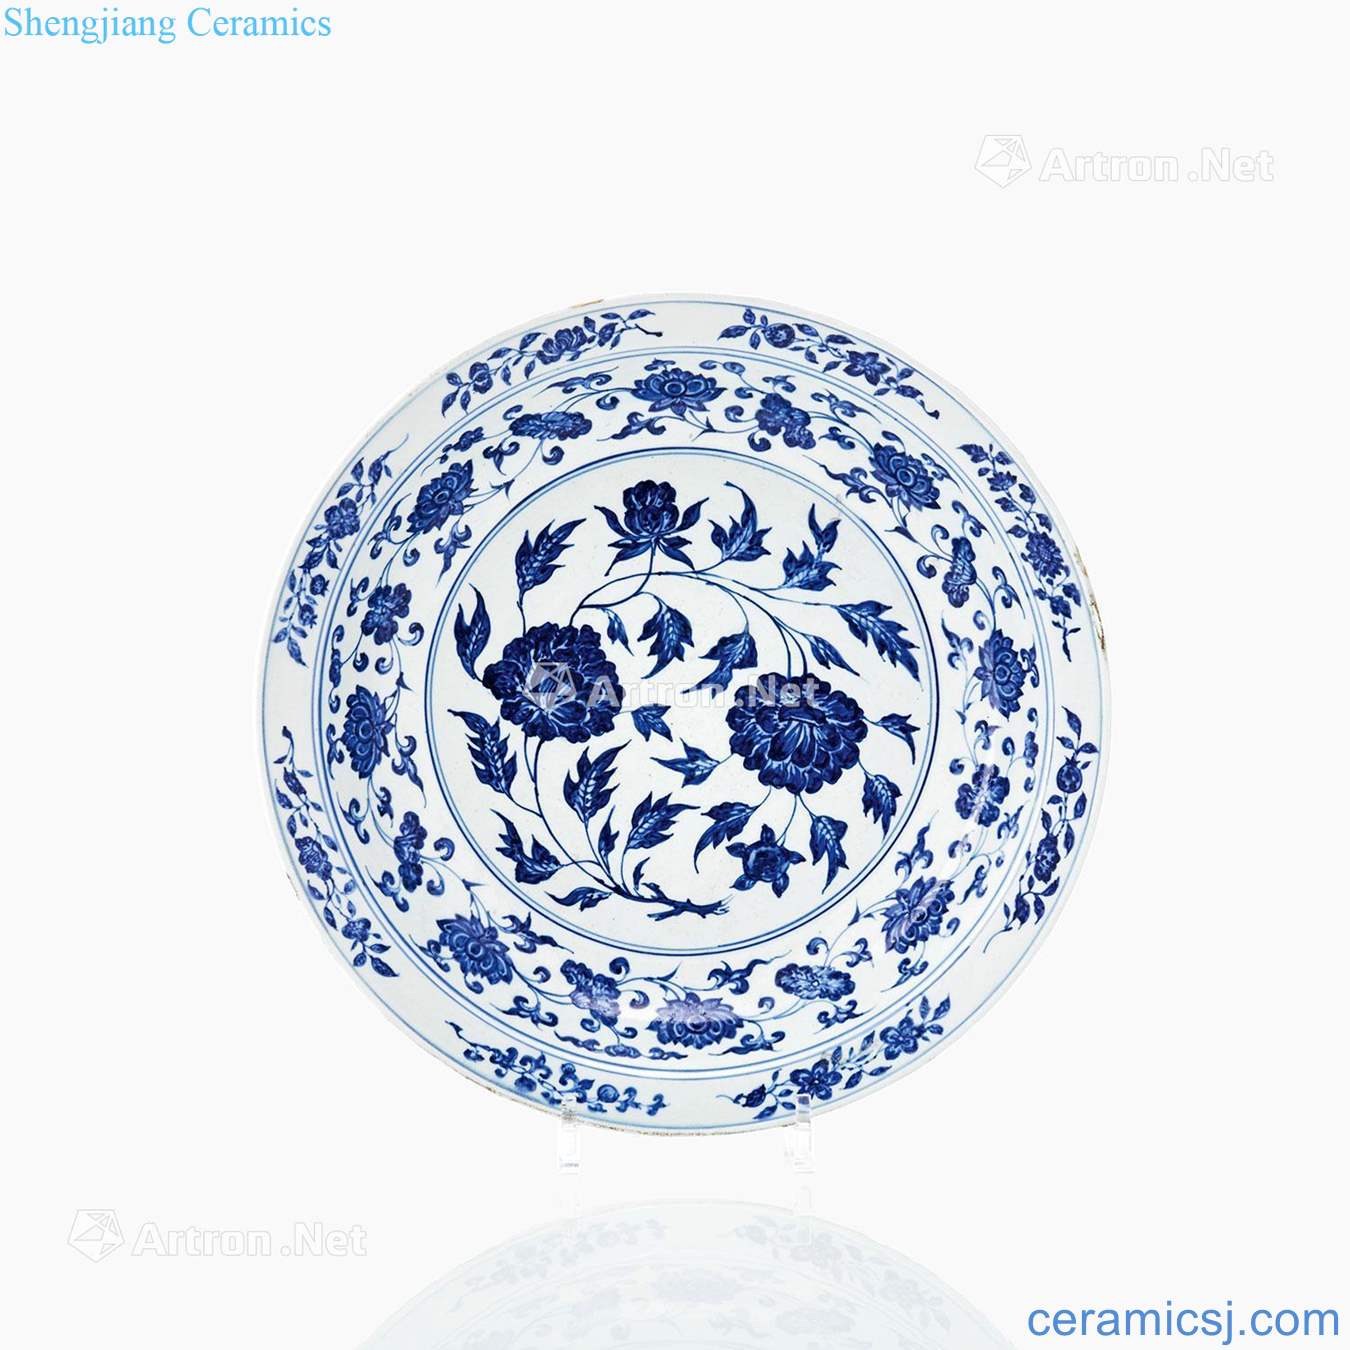 May/early of the republic of China in late qing dynasty and Ming style of blue and white peony